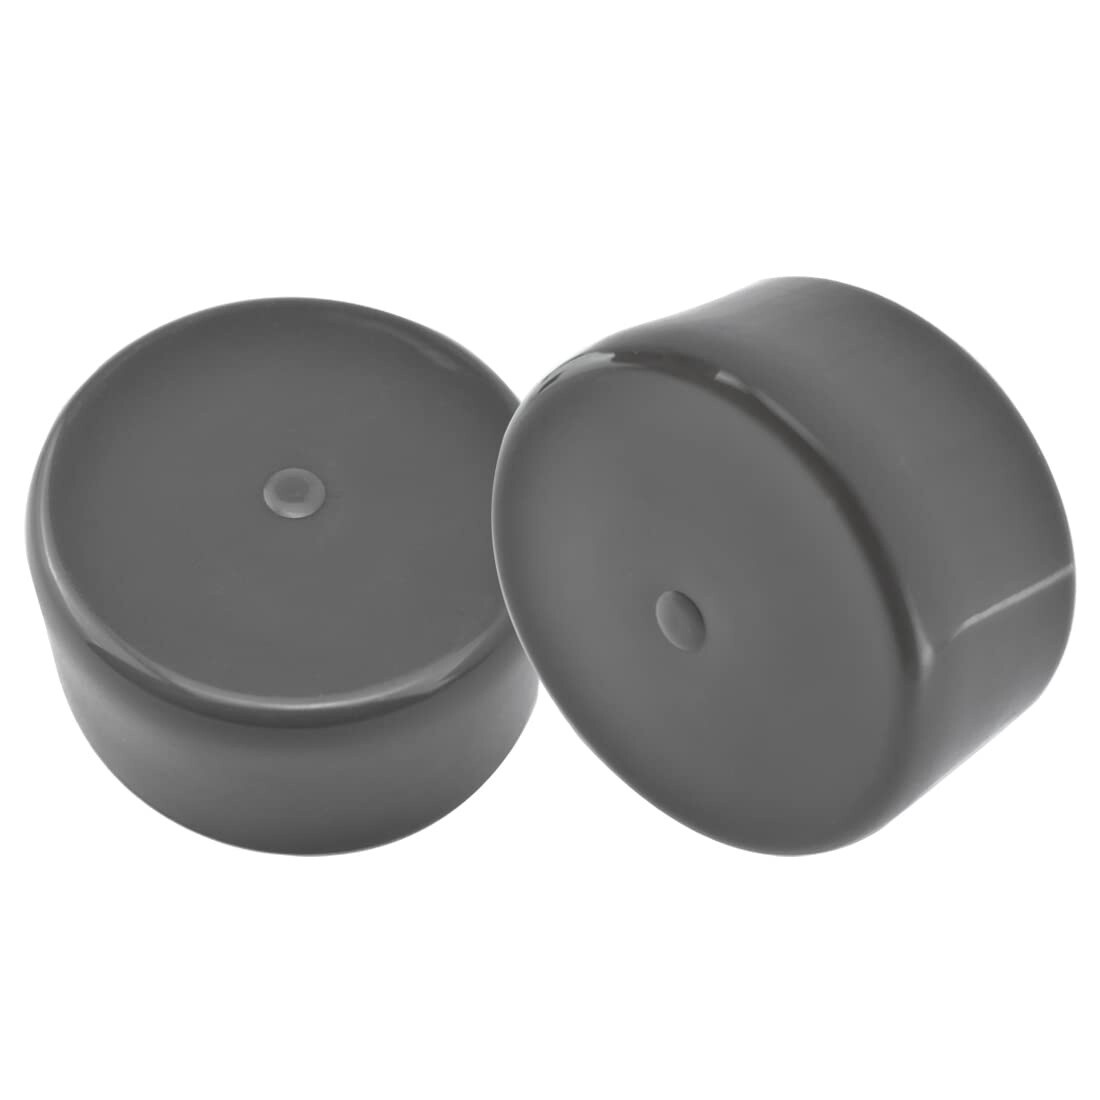 Bearing Buddy Dust Caps, 2-Pack 1.98 Inch Grey Rubber Caps Trailer Wheel Hub Dust Covers Replacement Bearing Protector